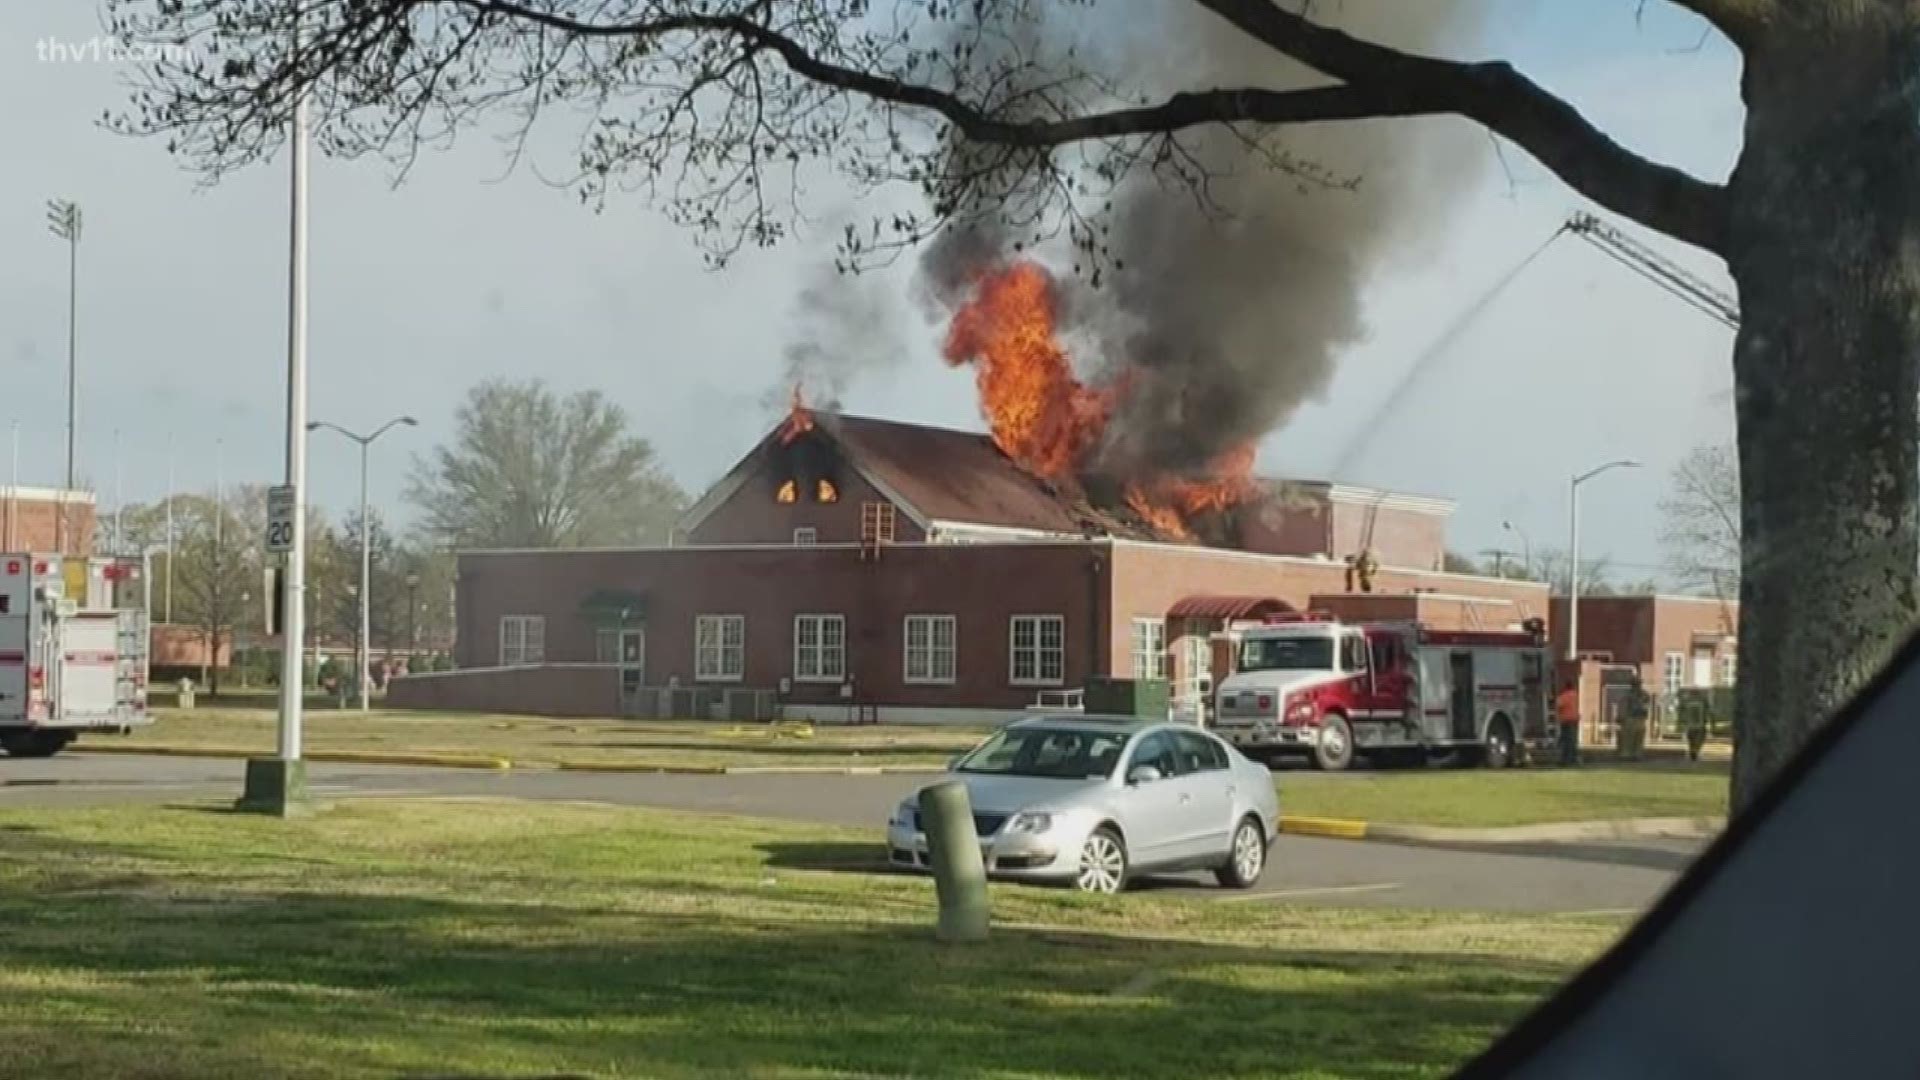 The Russellville Fire Department is on scene at a fire on the Arkansas Tech campus.